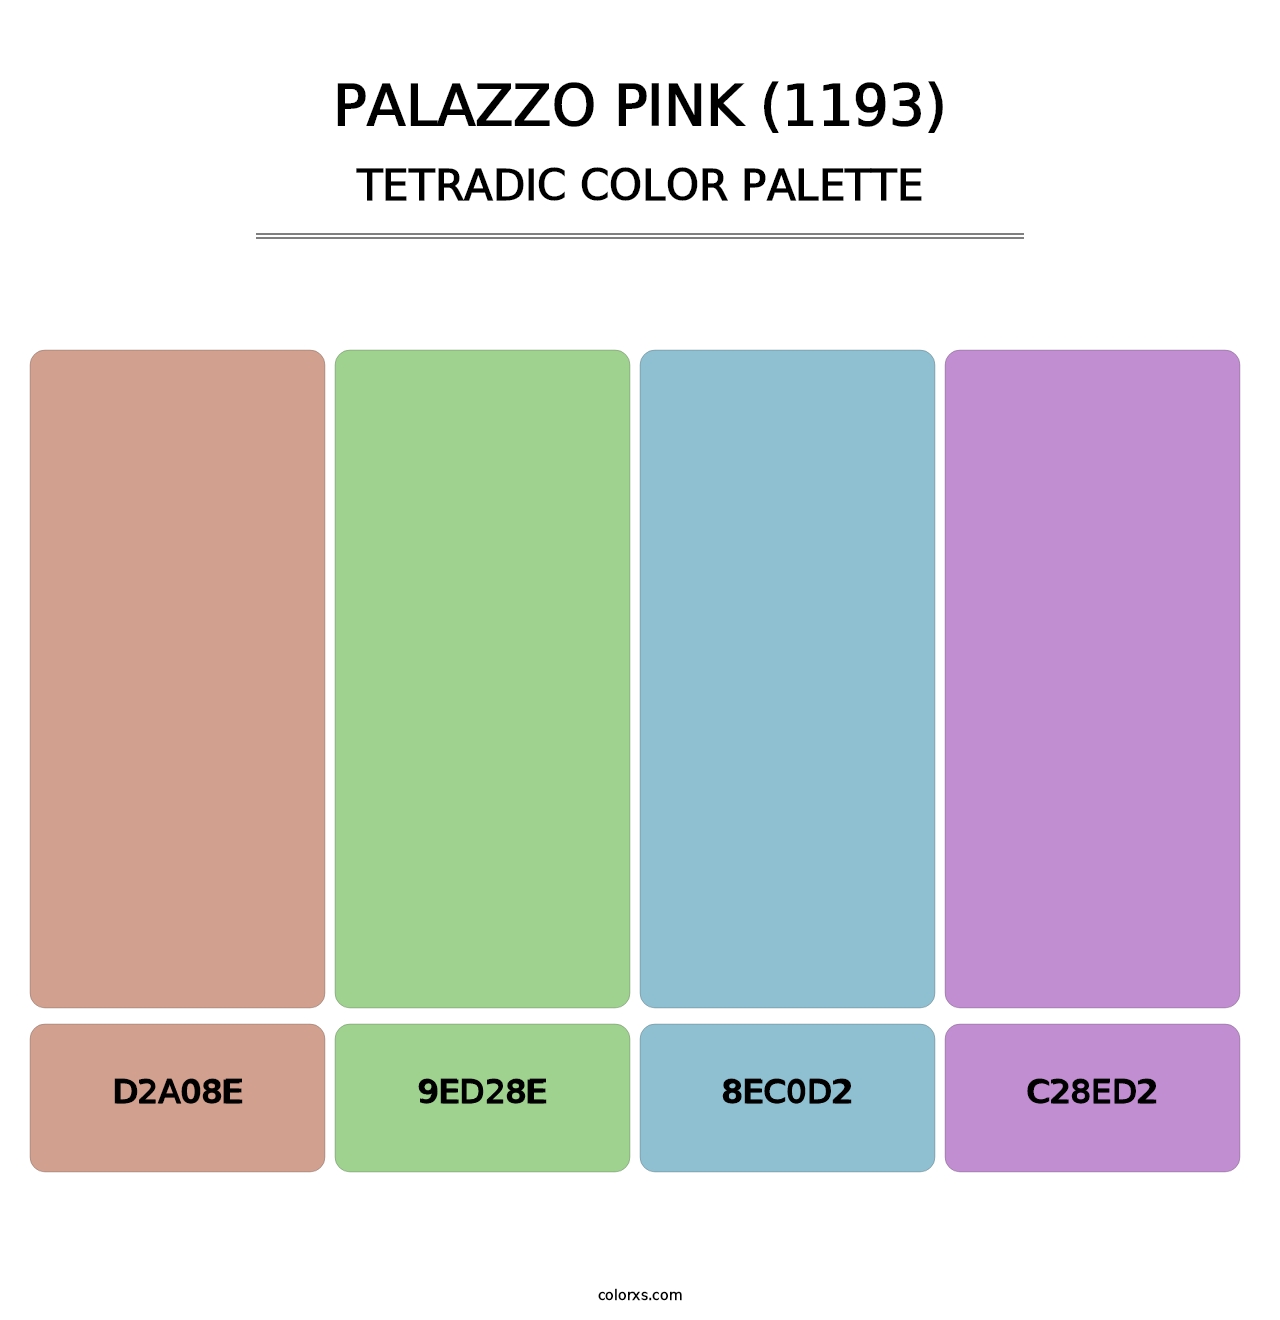 Palazzo Pink (1193) - Tetradic Color Palette